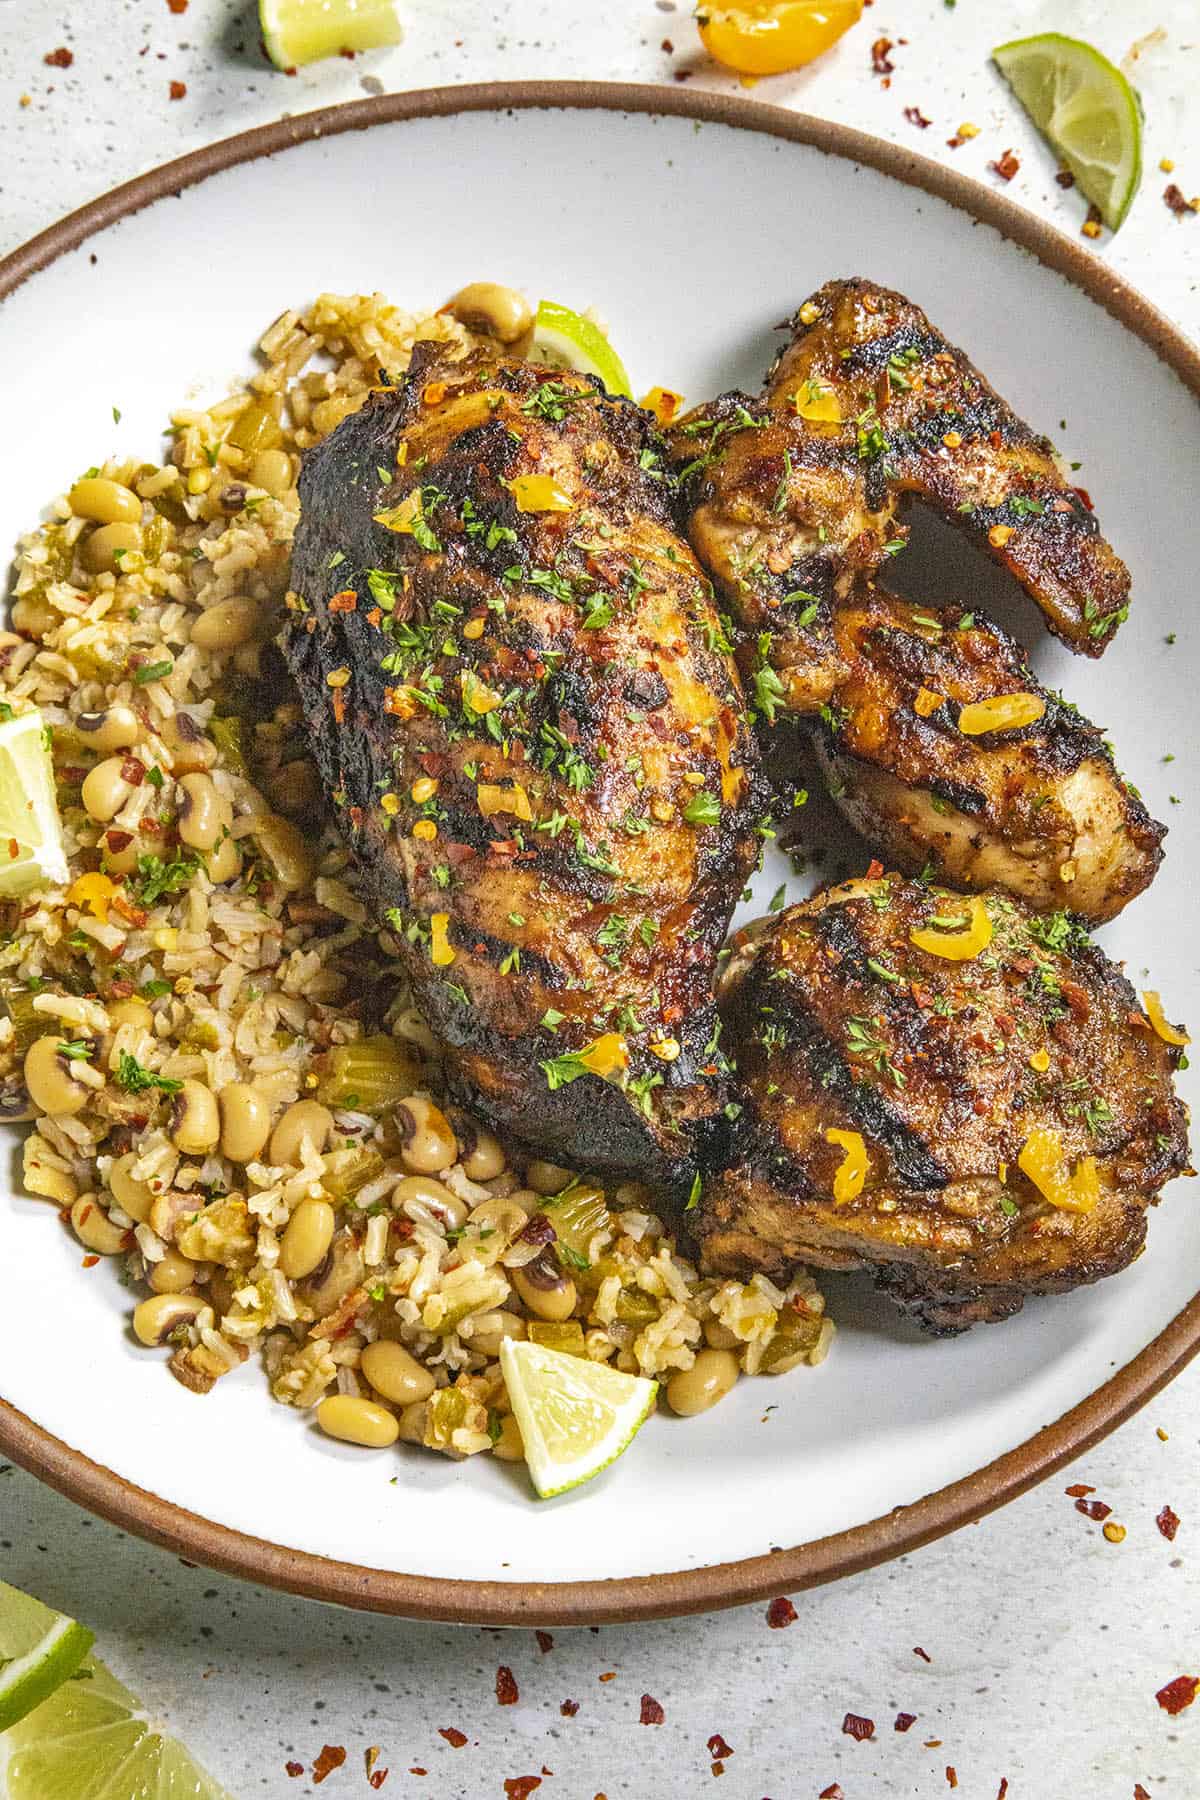 Jamaican Jerk Chicken served on a plate with Jamaican rice and peas